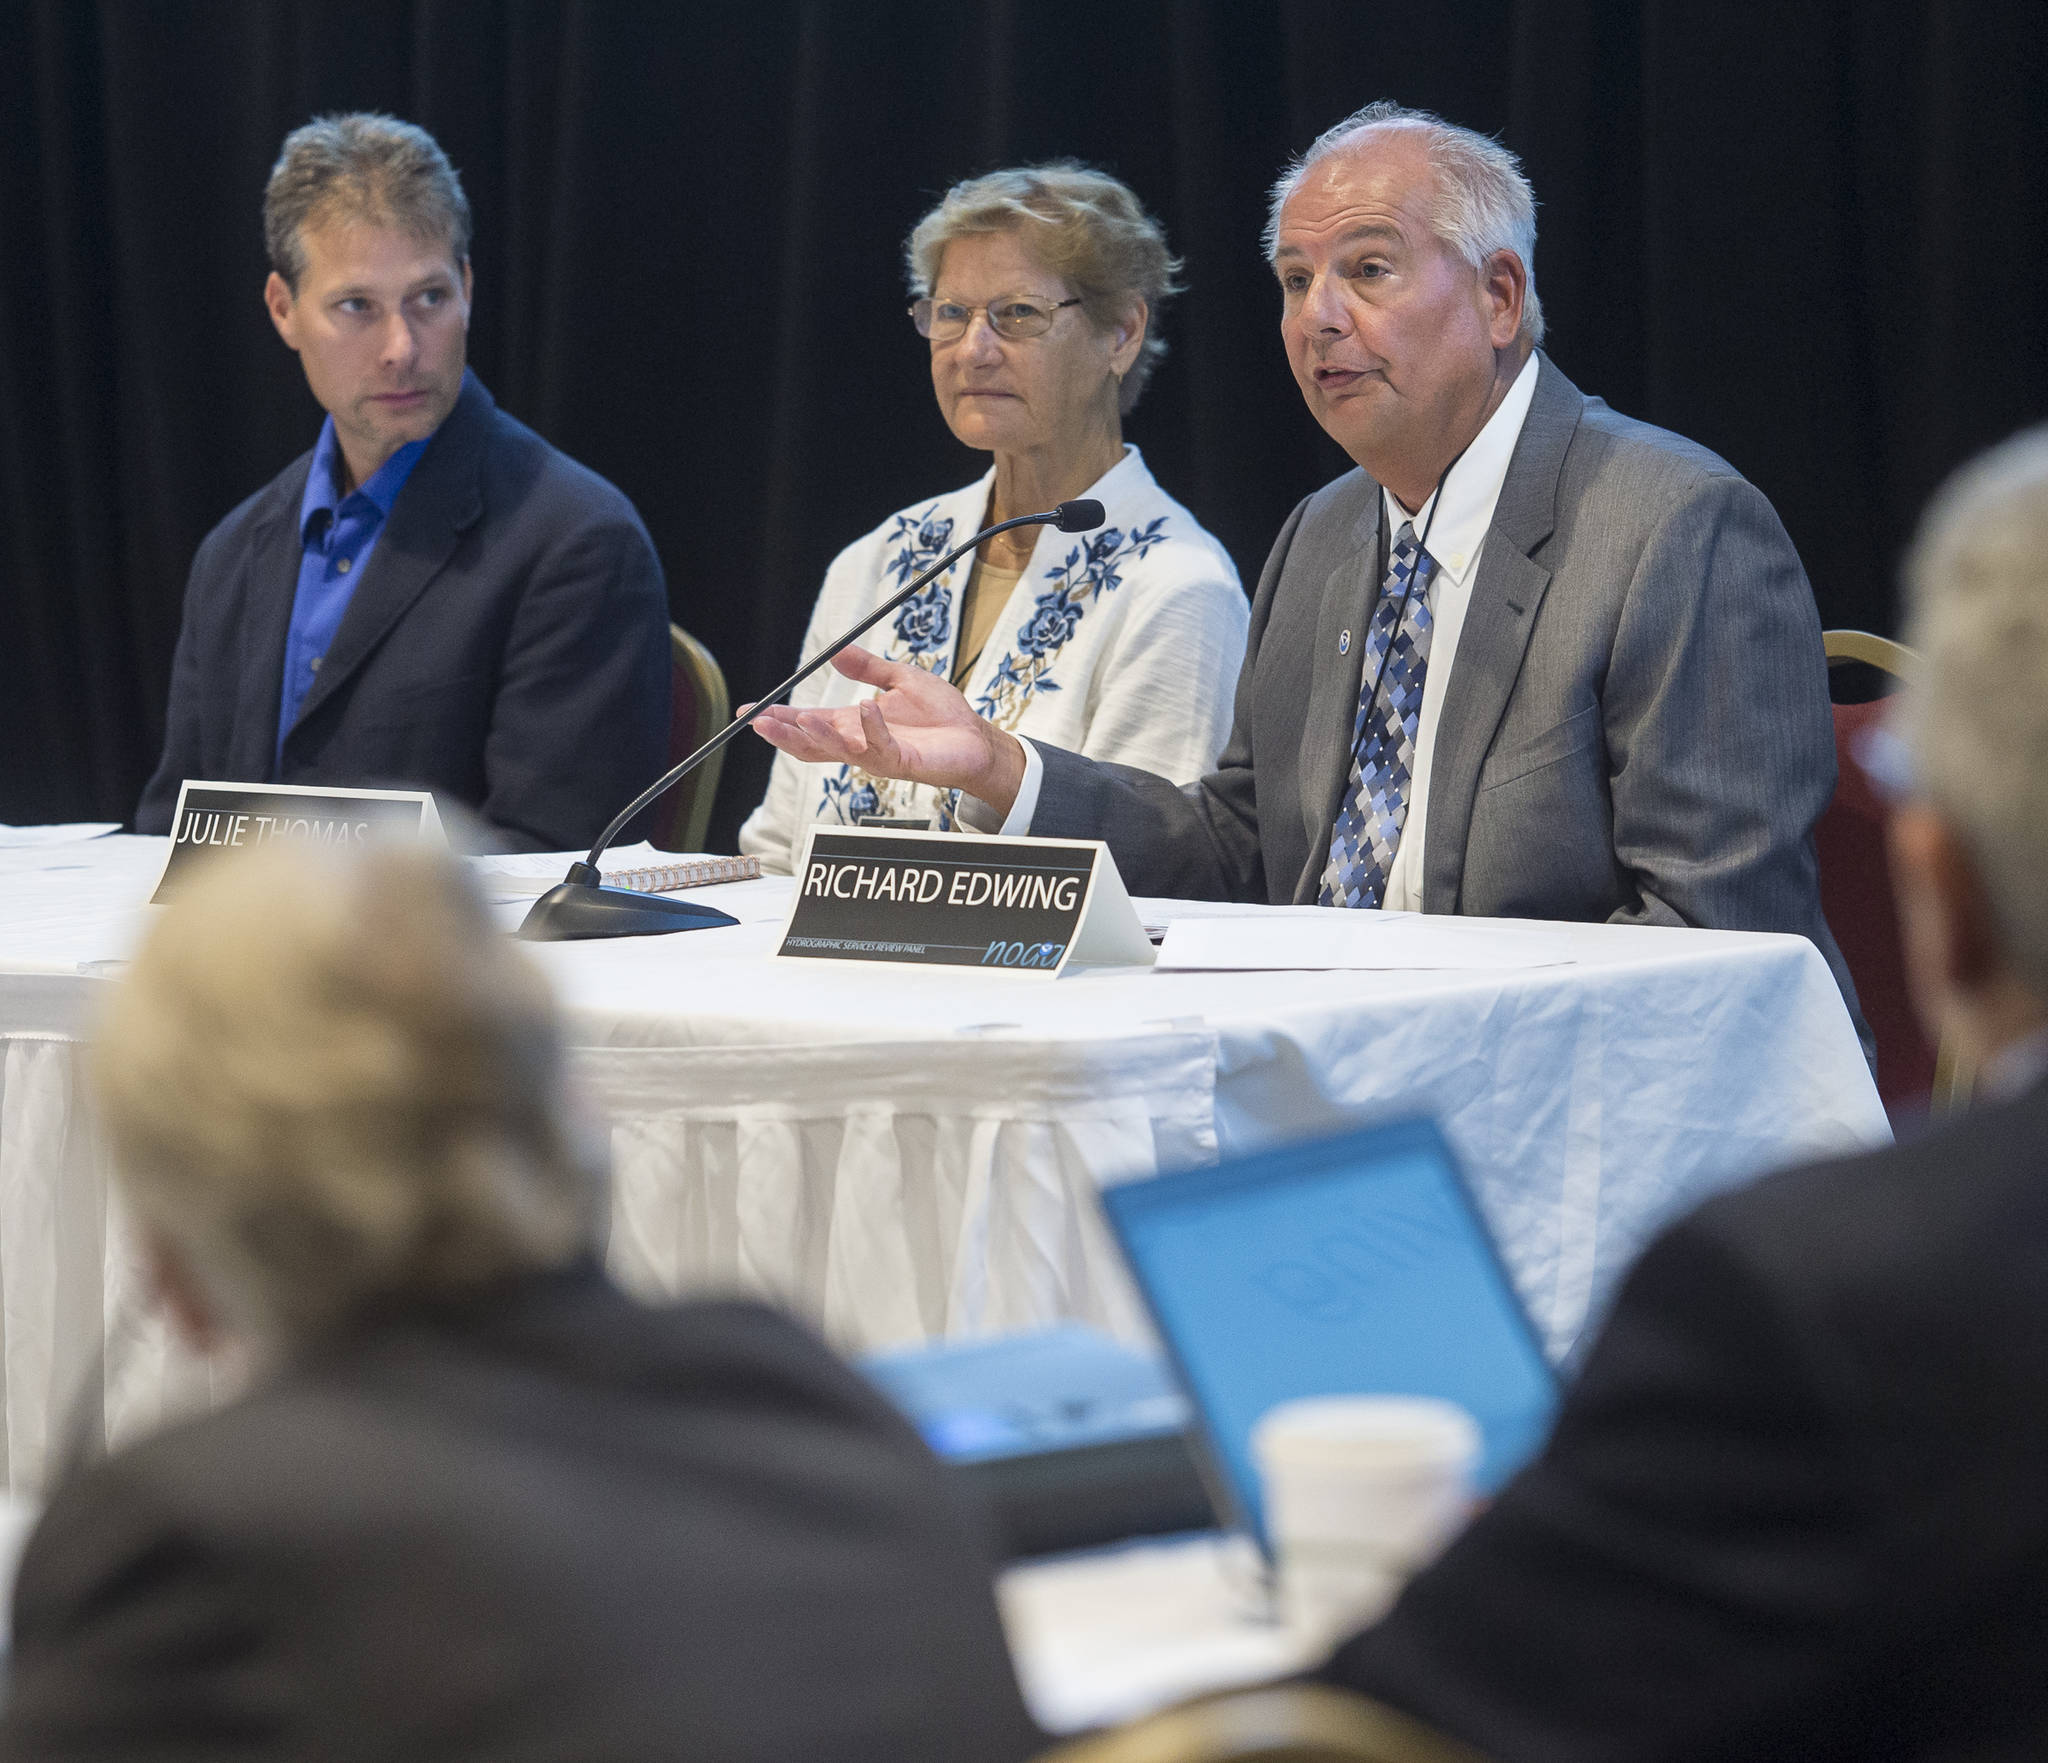 Rich Edwing, Director of the Center for Operational Oceanographic Products and Services for NOAA, right, speaks about Alaska water level partnerships during NOAA’s Hydrographic Services Review Panel meetings taking place at the Elizabeth Peratrovich Hall on Tuesday, Aug. 28, 2018. (Michael Penn | Juneau Empire)